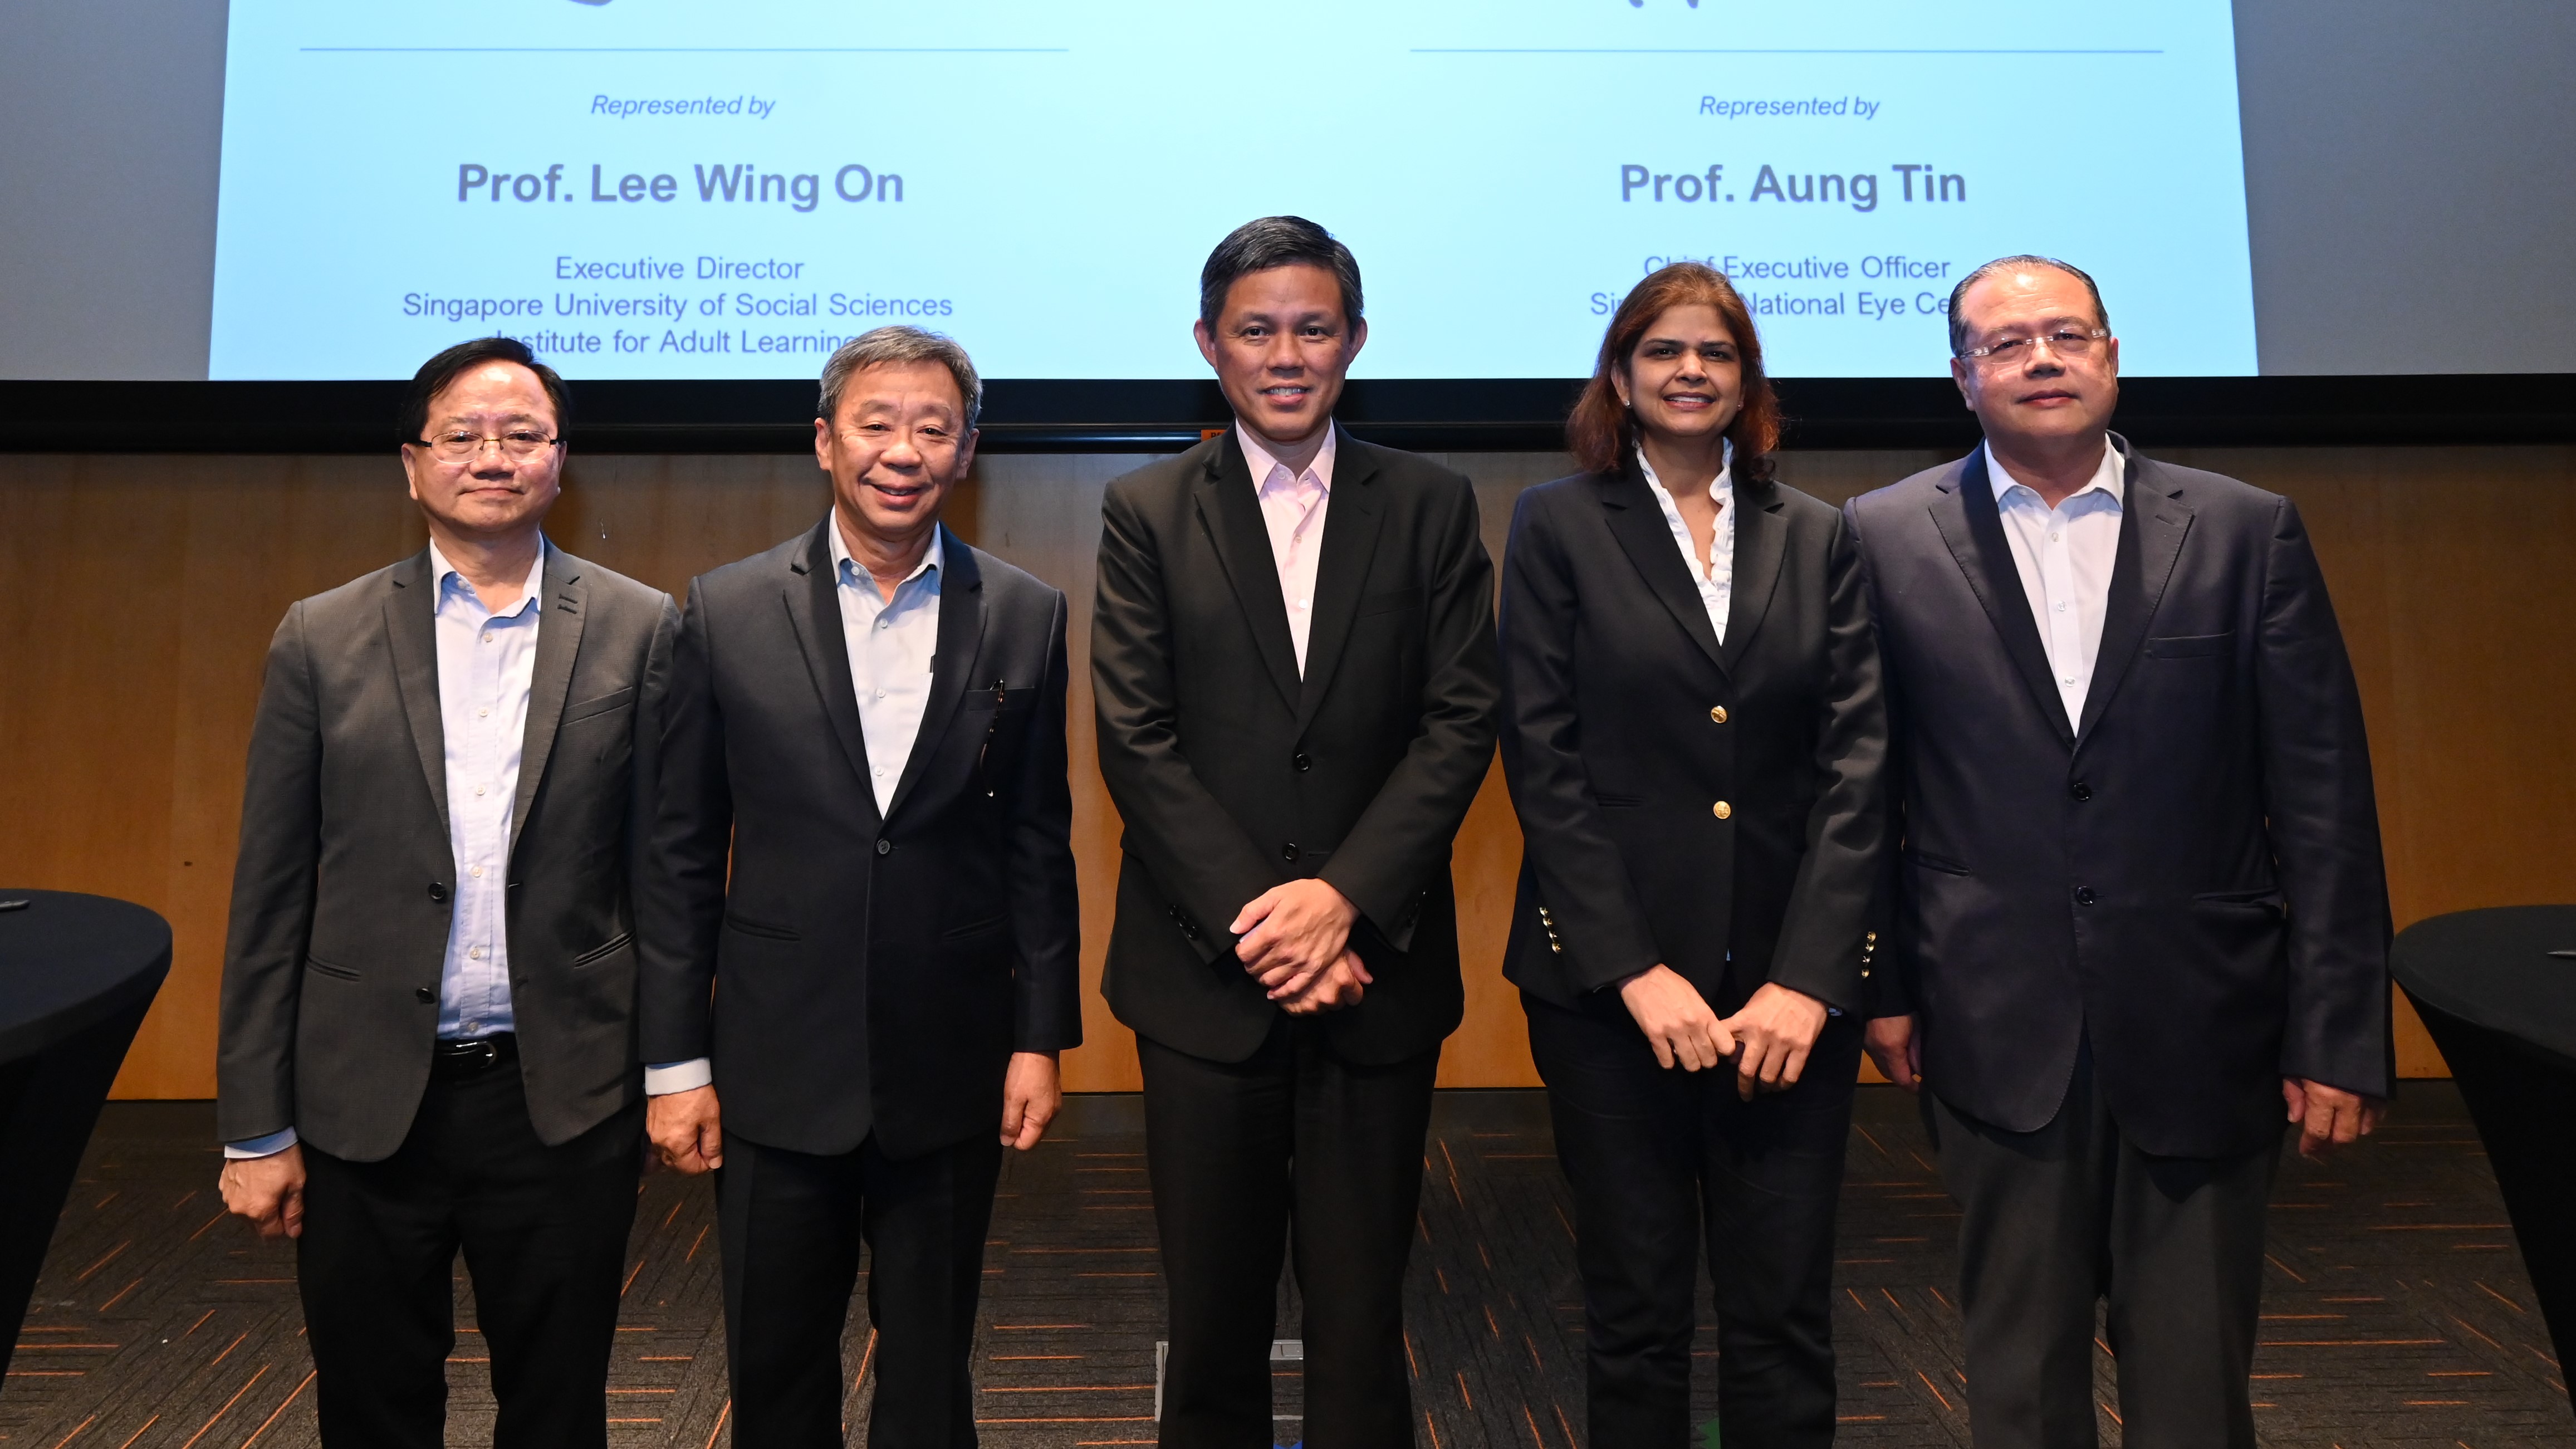 IAL Inks Two MOUs with Microsoft and Singapore National Eye Centre to Advance Digital Workplace Learning